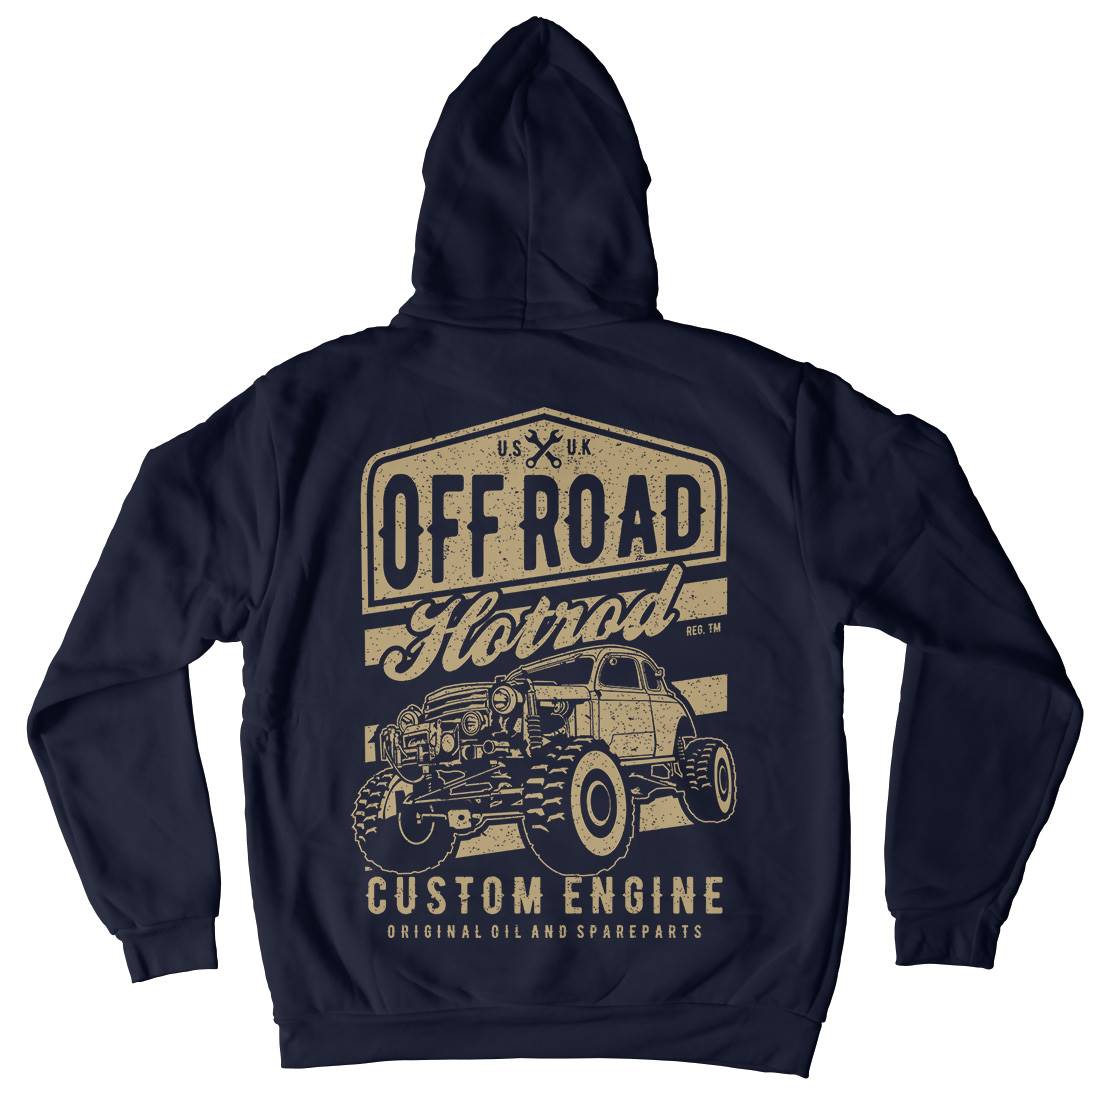 Offroad Hotrod Kids Crew Neck Hoodie Cars A730